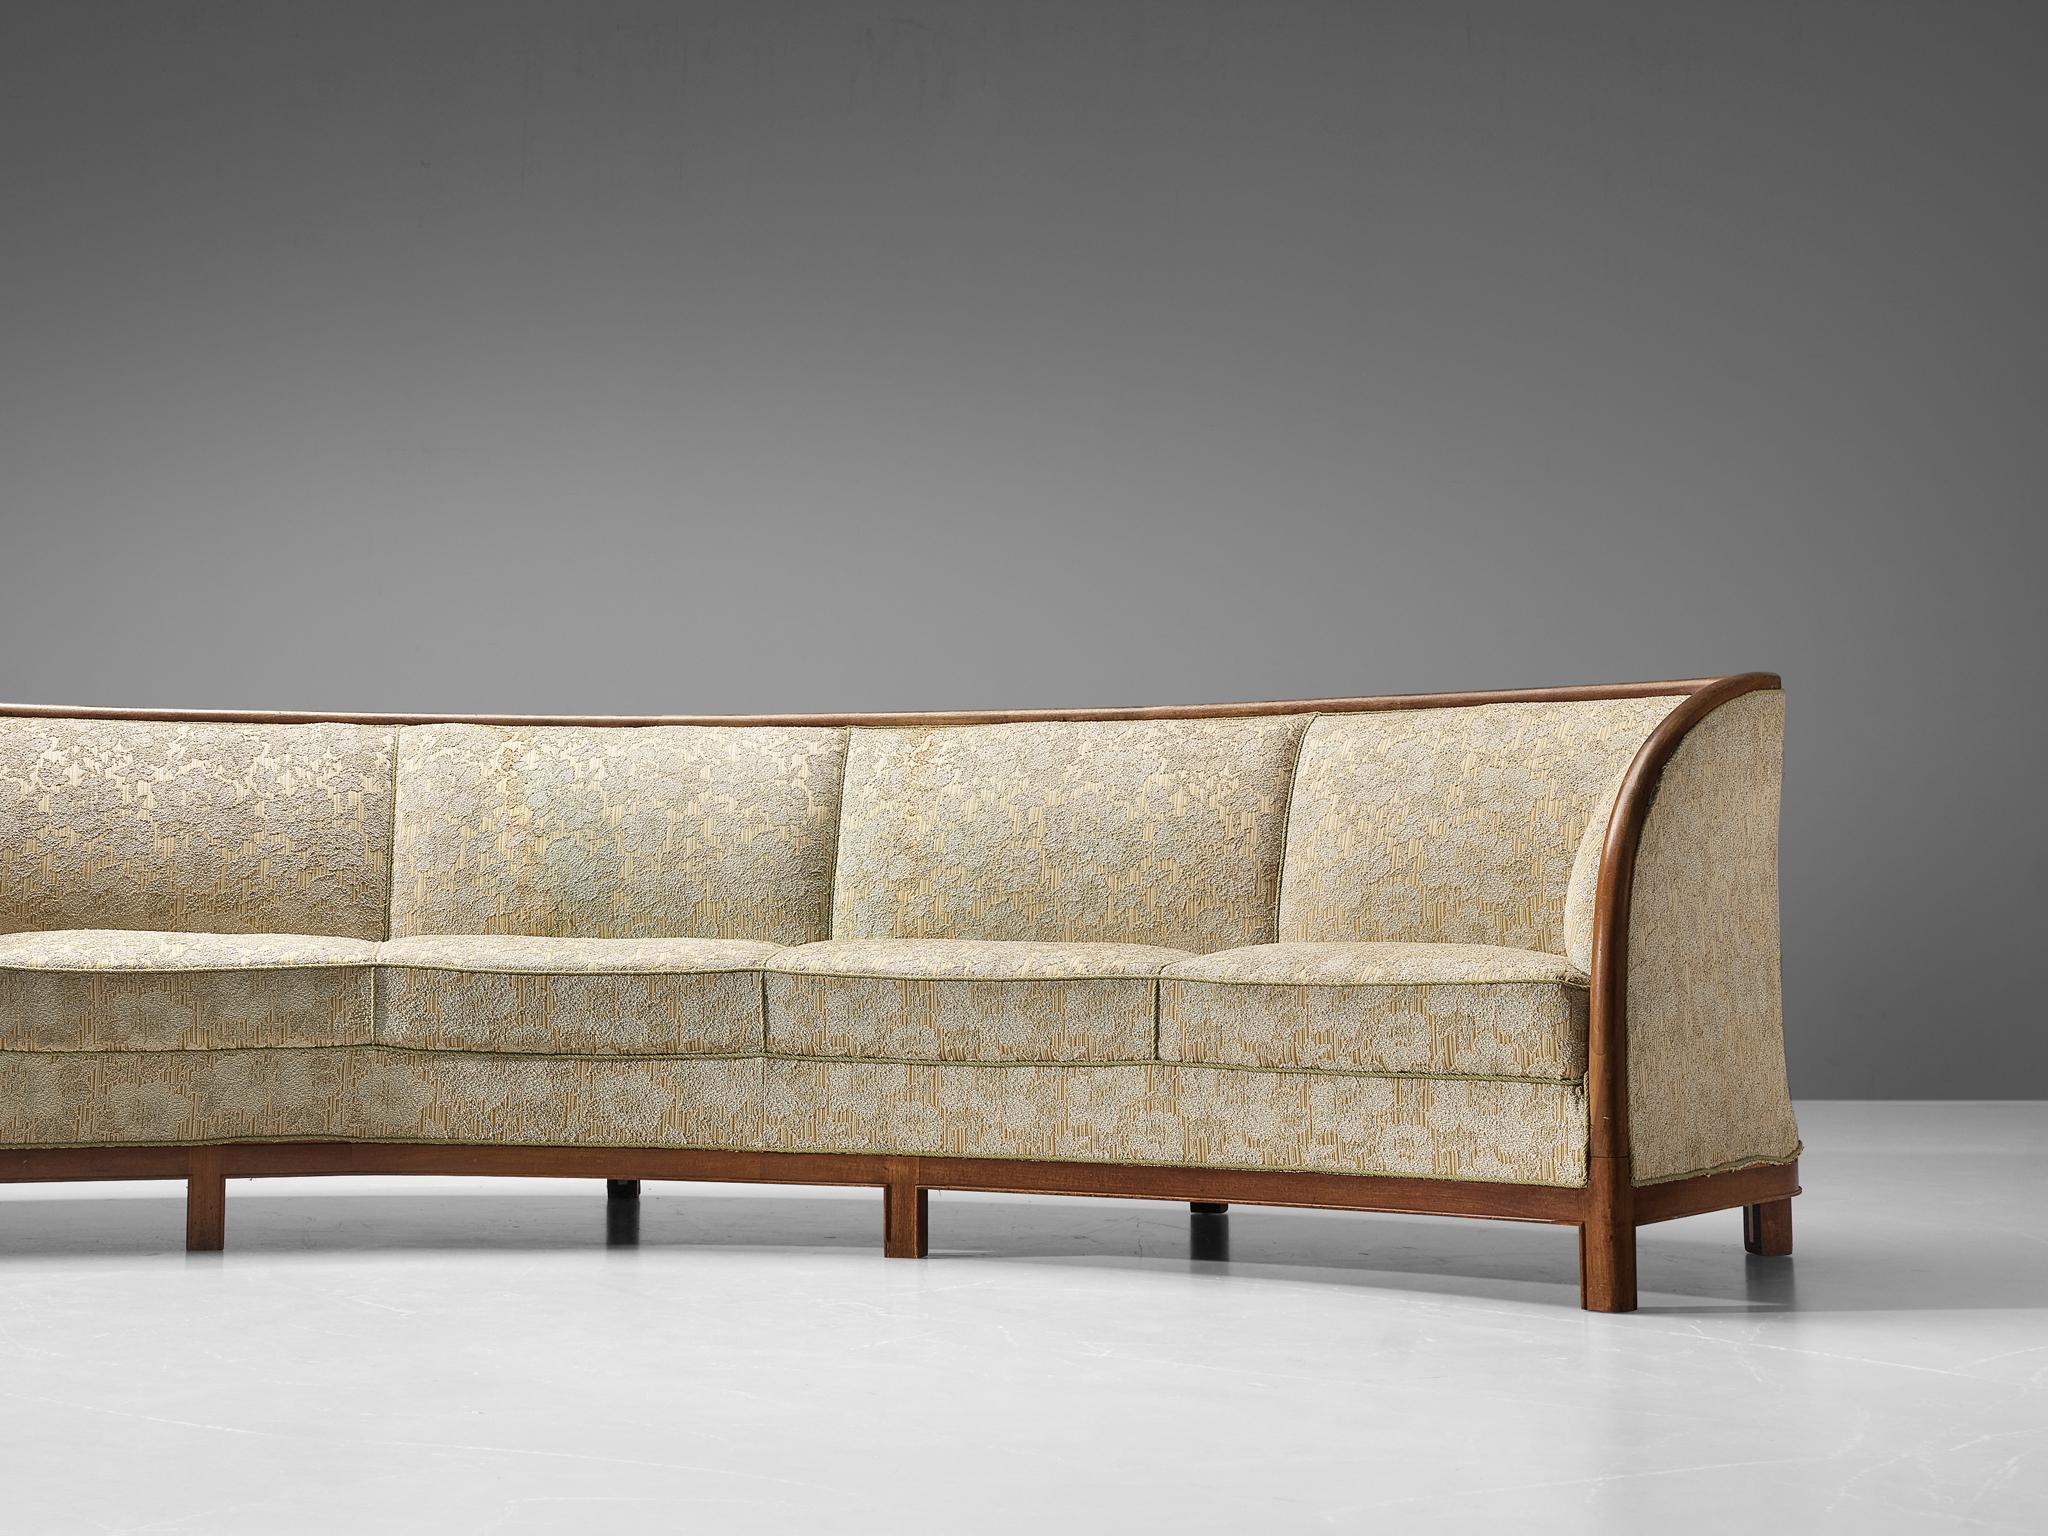 Large Curved Danish Sofa in Light Fabric Upholstery